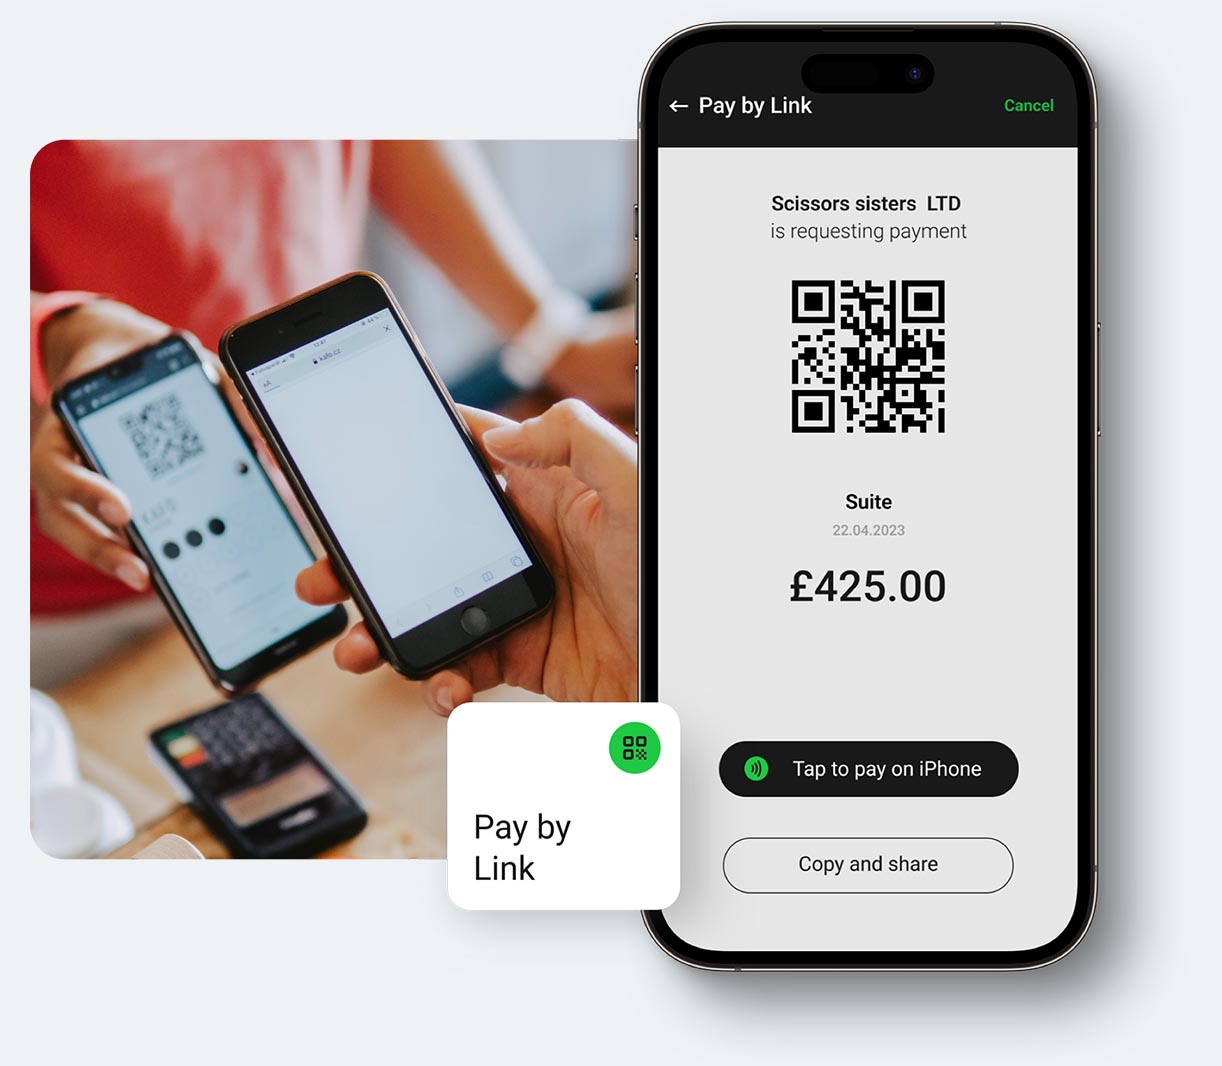 Touch-free payments made easy